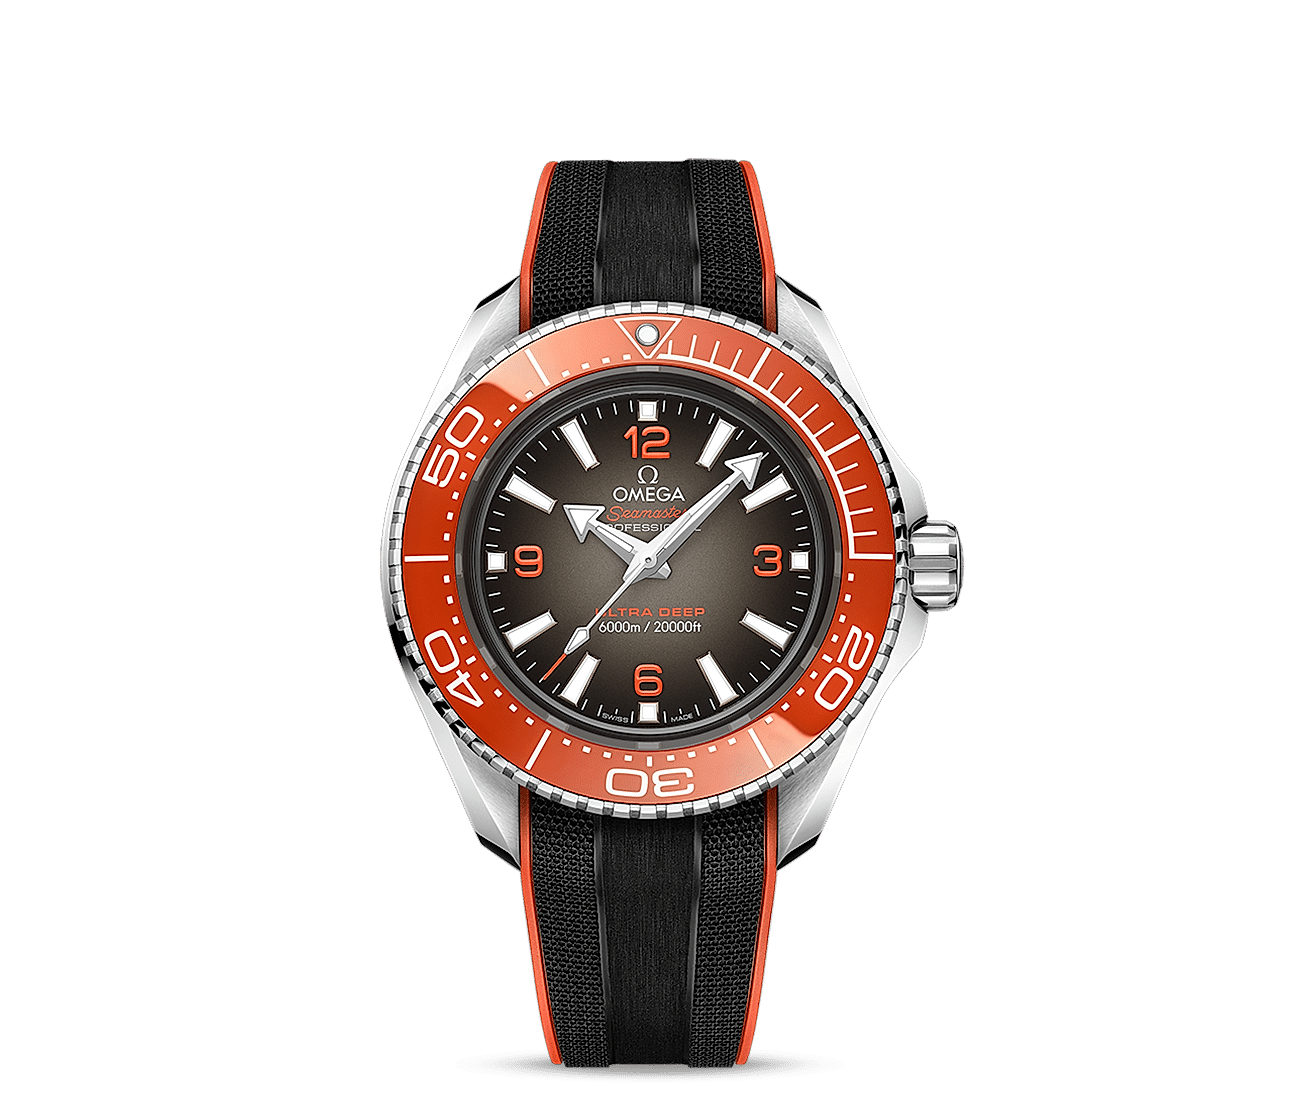 Seamaster planet ocean Co-Axial Master Chrometer